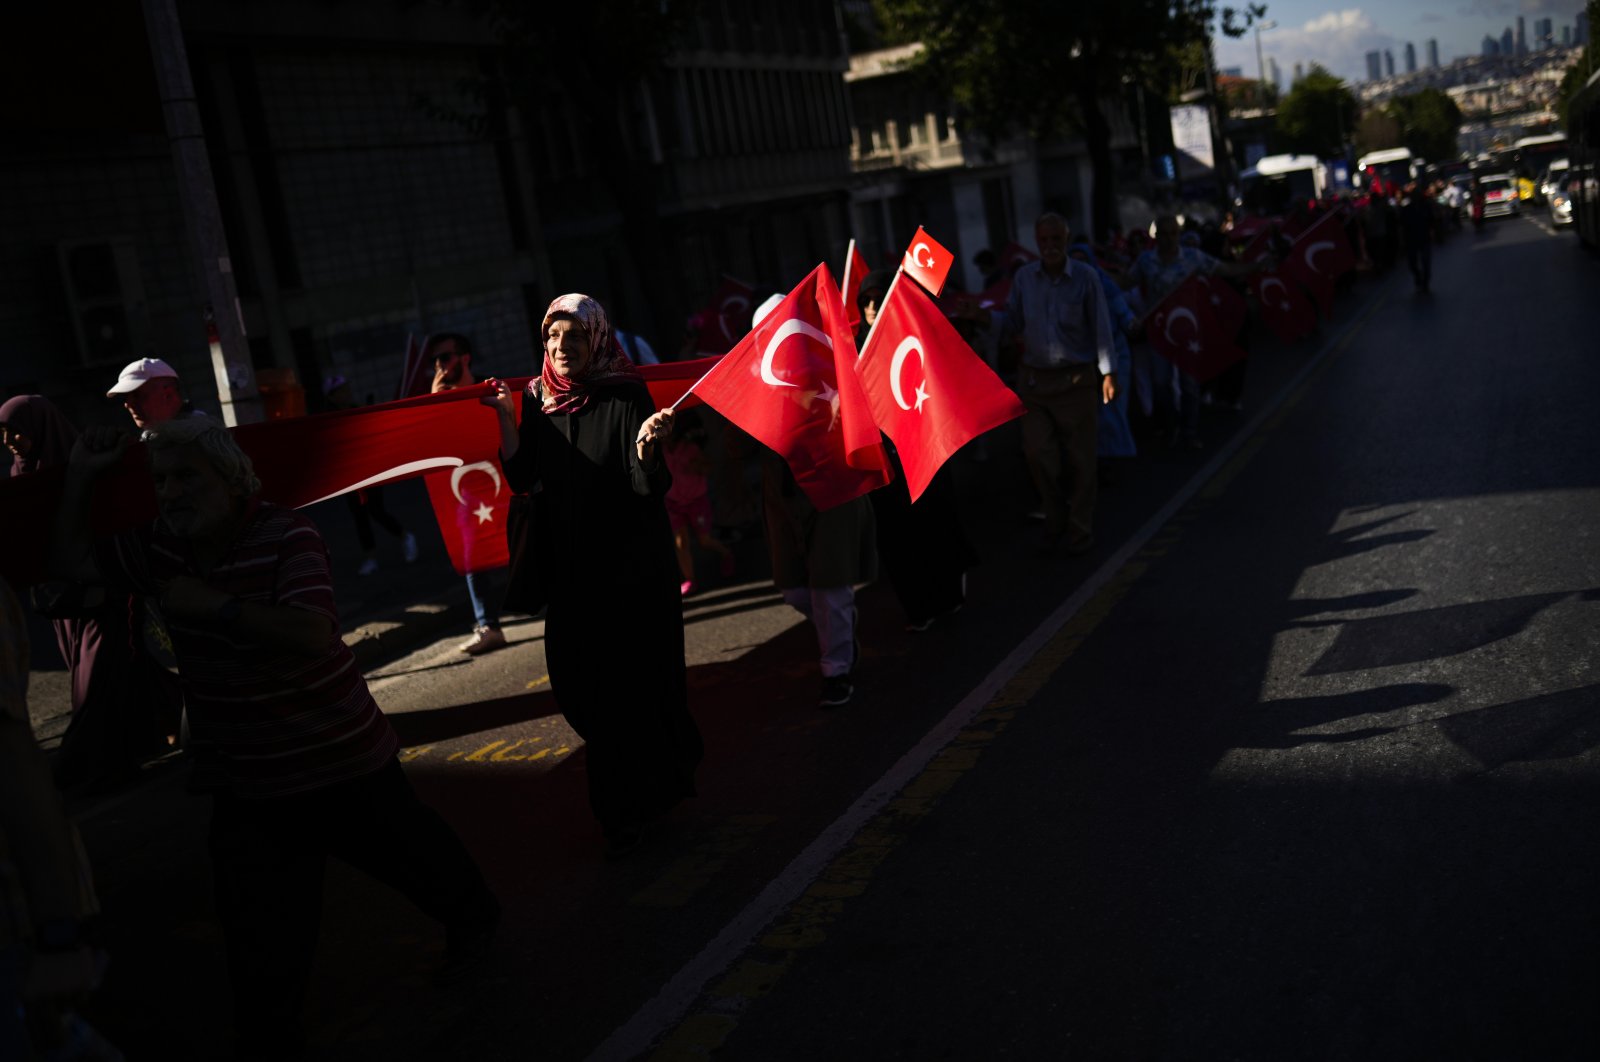 People wave Turkish flags as they rally to honor the victims of the July 15, 2016 failed coup attempt, in Istanbul, Turkey, July 15, 2022. (AP Photo)